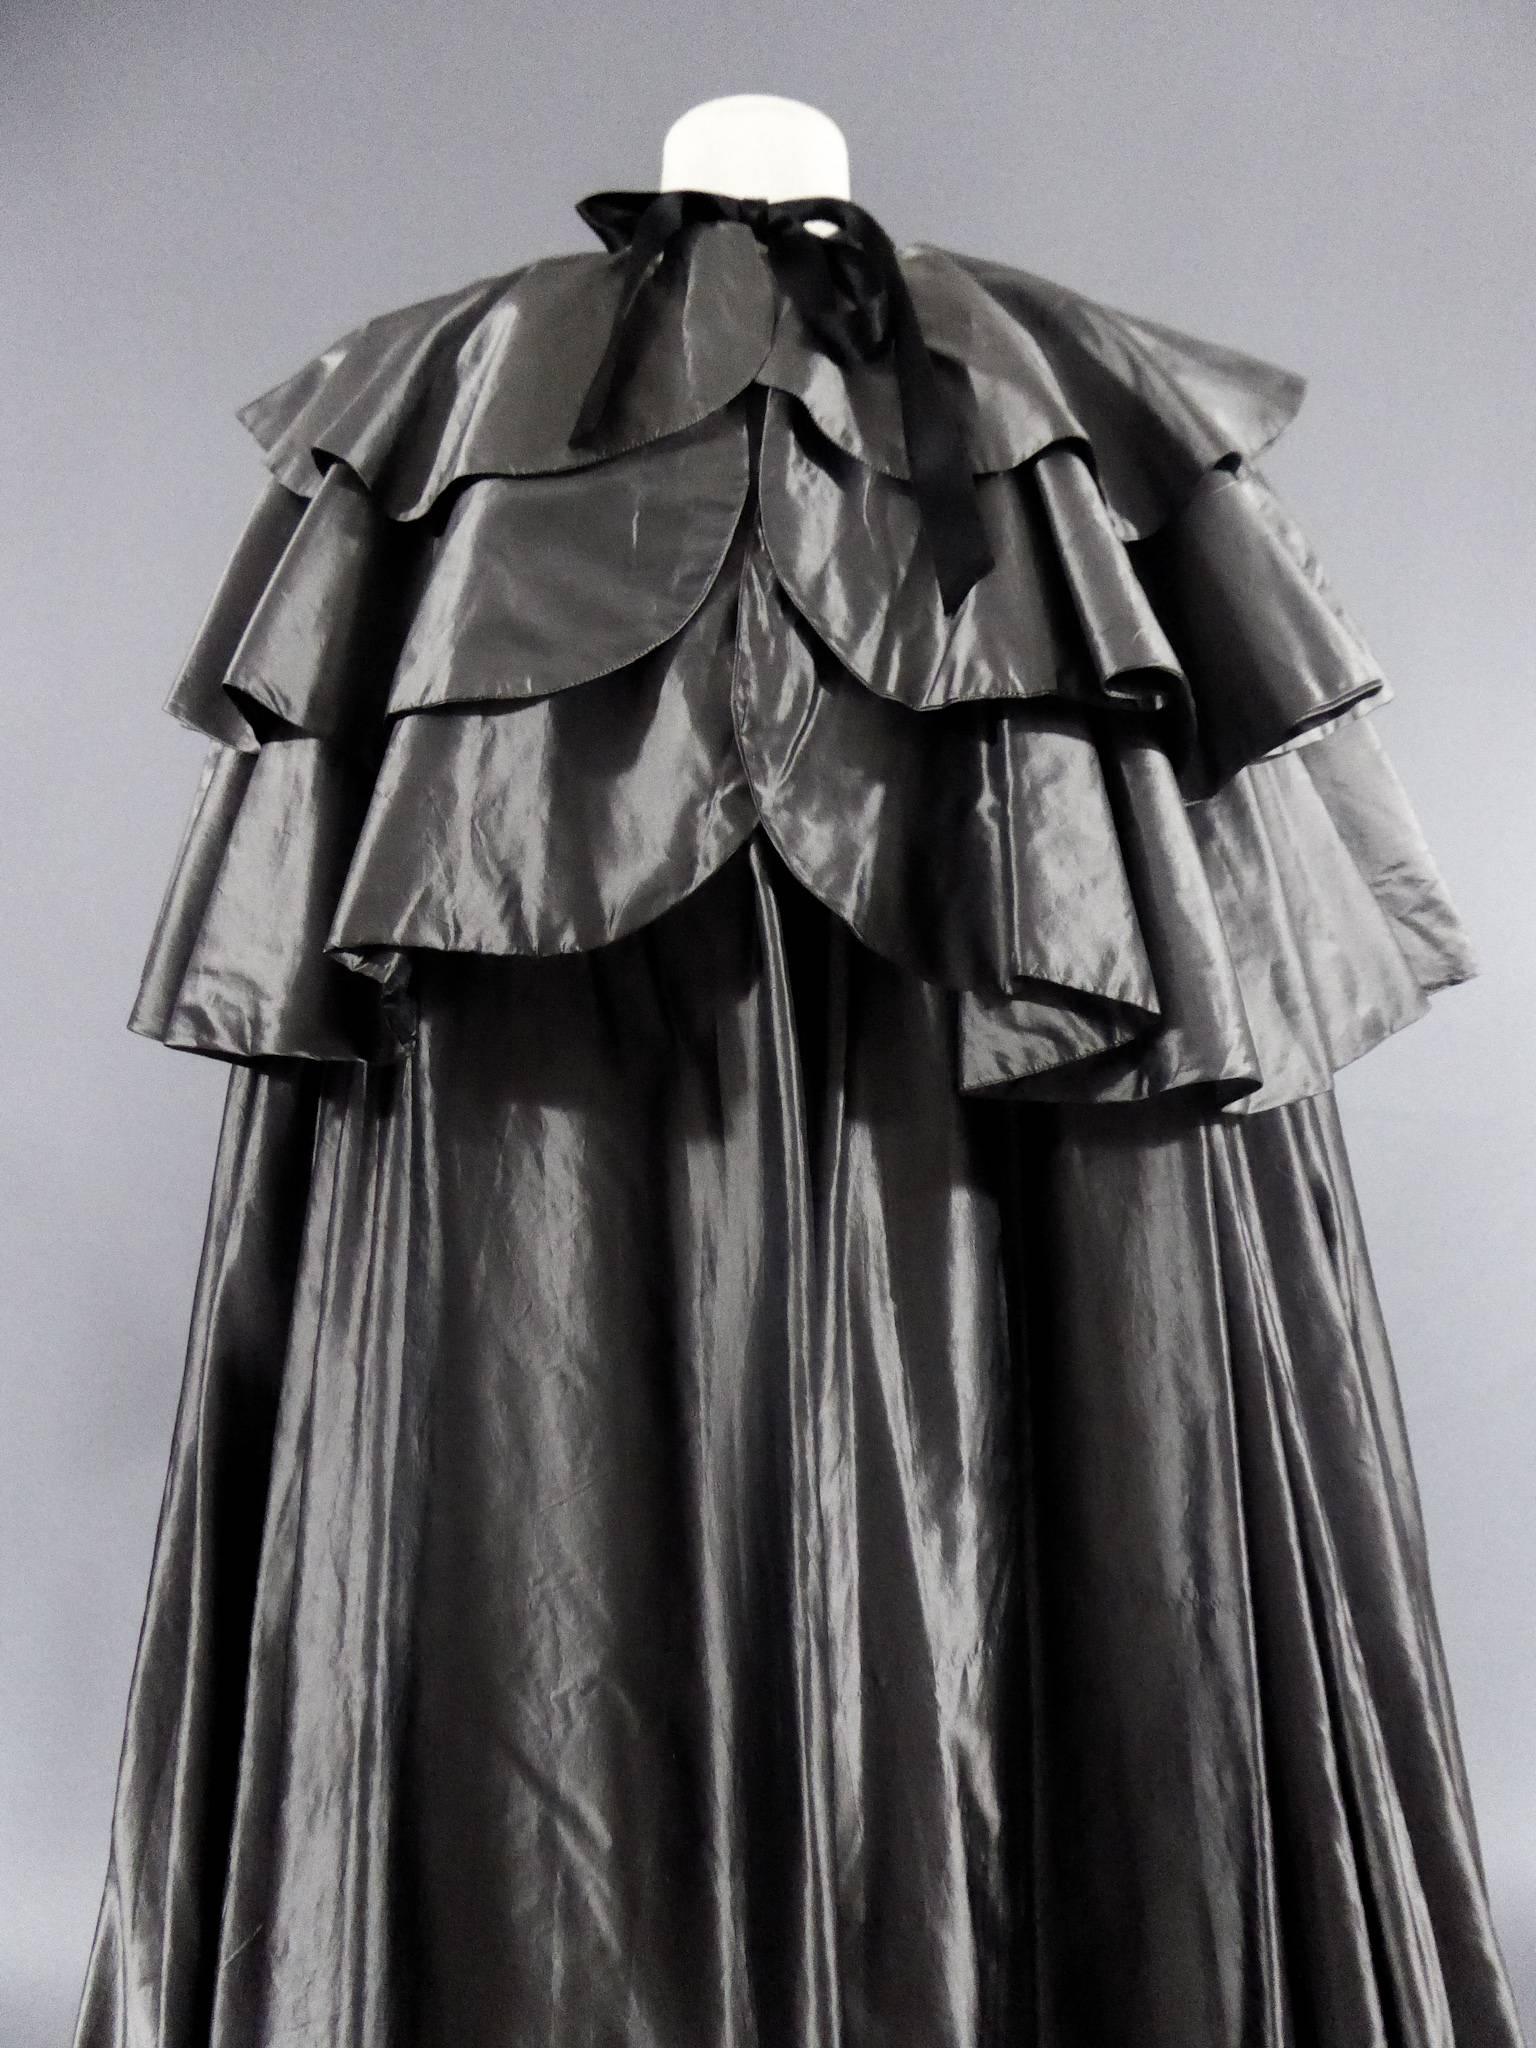 
Circa 1975

France

Cape of Princess Lilian of Belgium. Model having been exhibited at the Christian Dior Museum in Granville. Cape of big night way cochet, gray. Hollow-folded and flatter shoulders and three-tiered split-backs. Taffeta silk silver